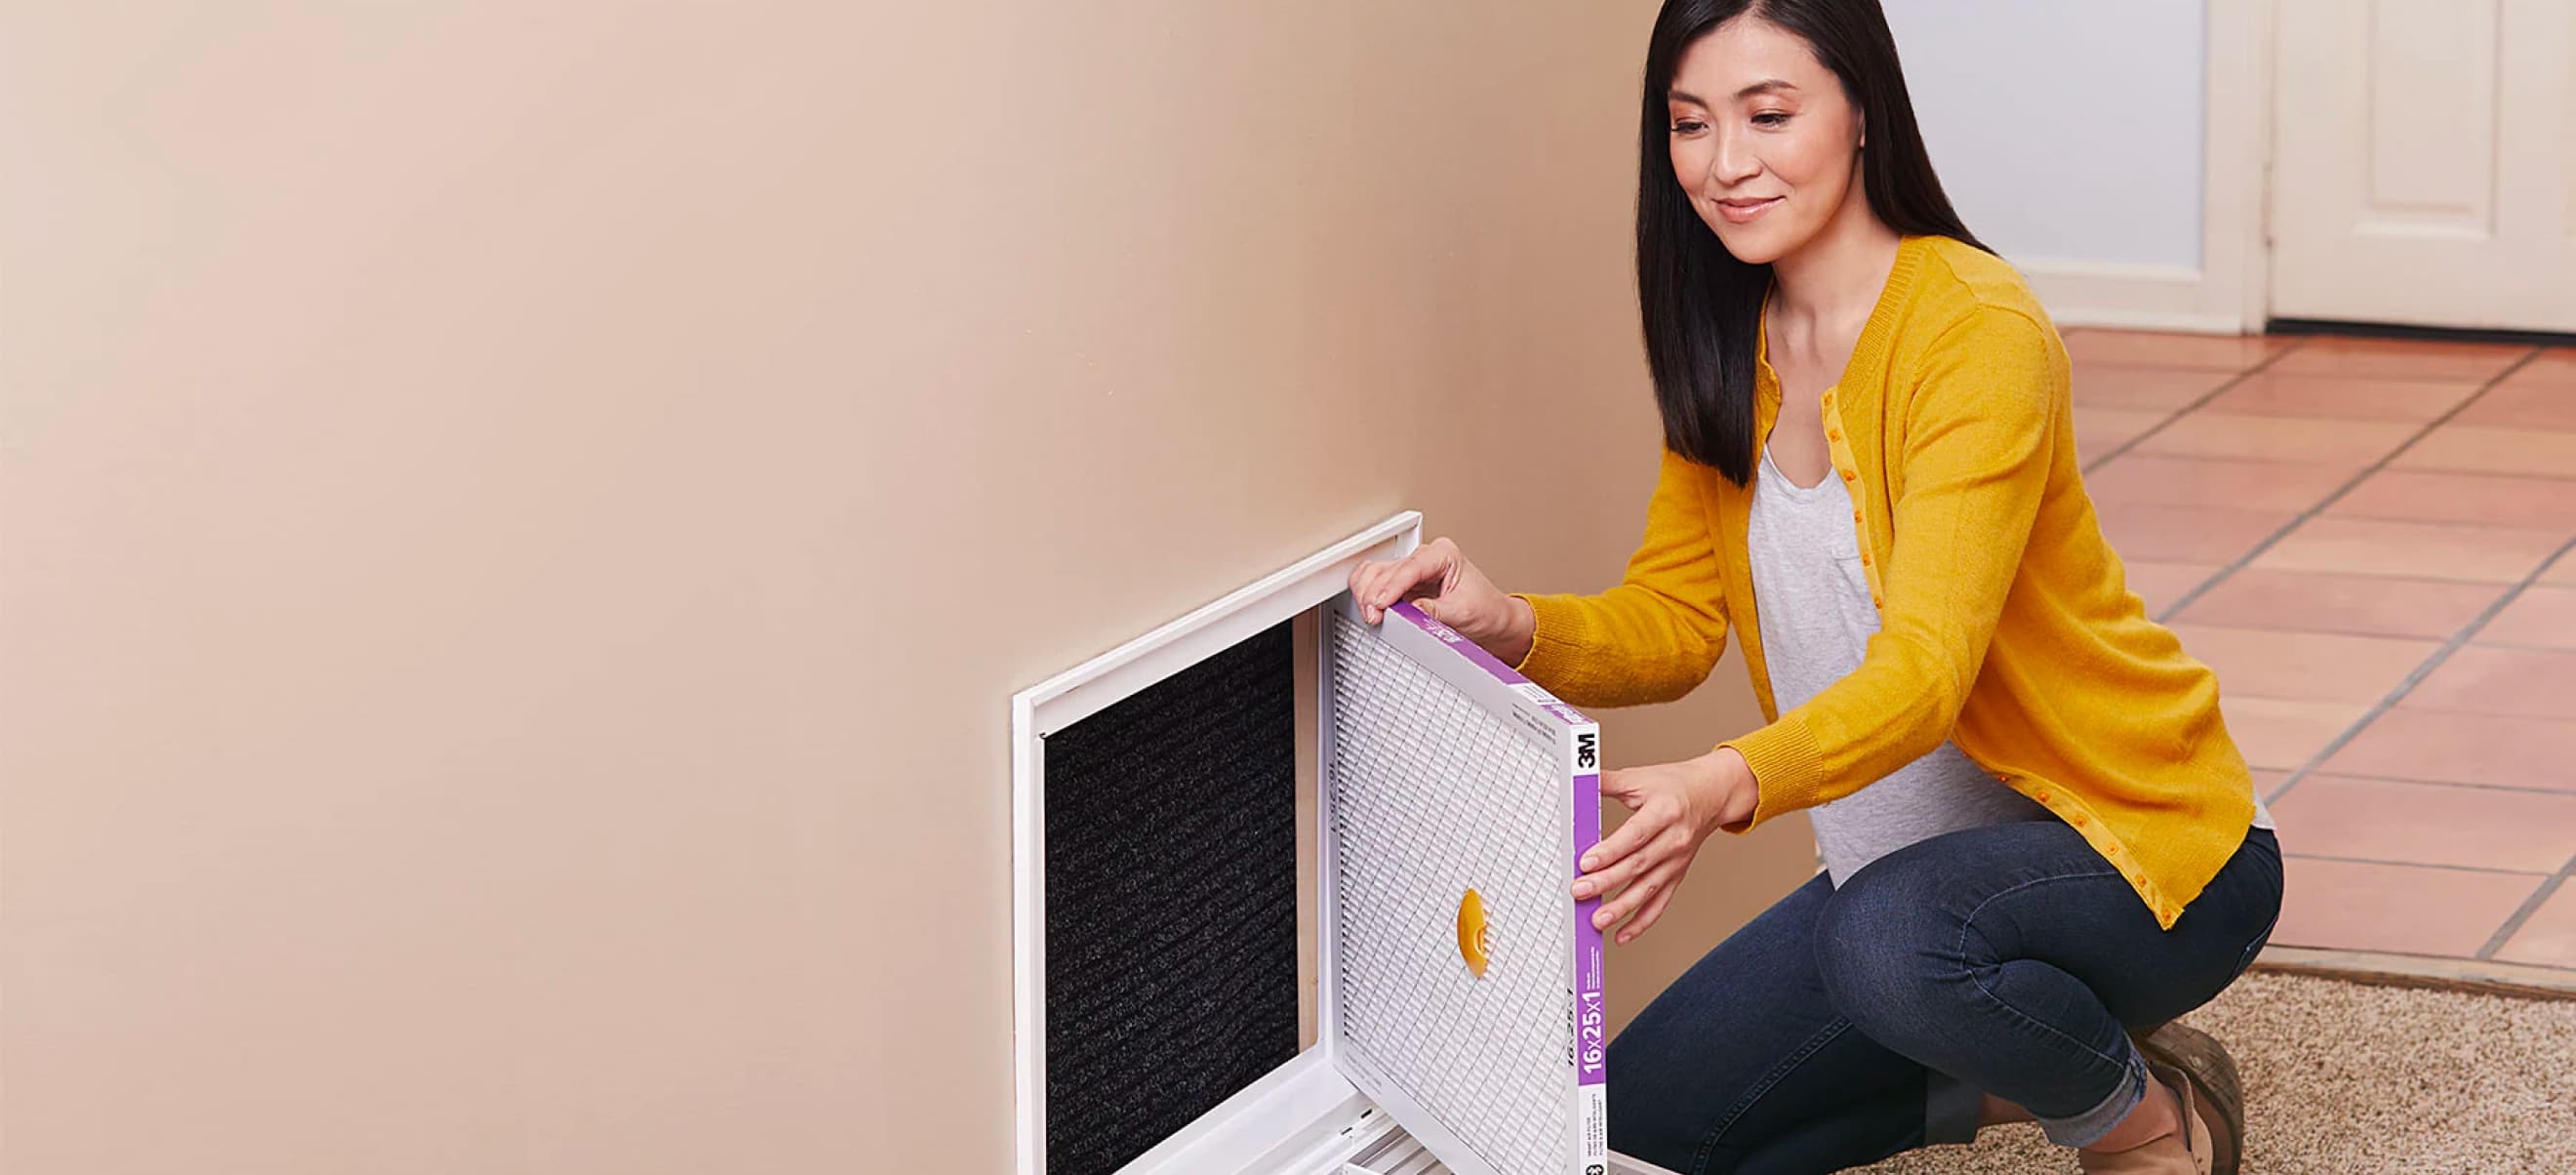 A woman is kneeling on the floor, installing a 3M Filtrete into a wall-mounted air return vent inside a home. She is wearing a yellow cardigan and blue jeans.